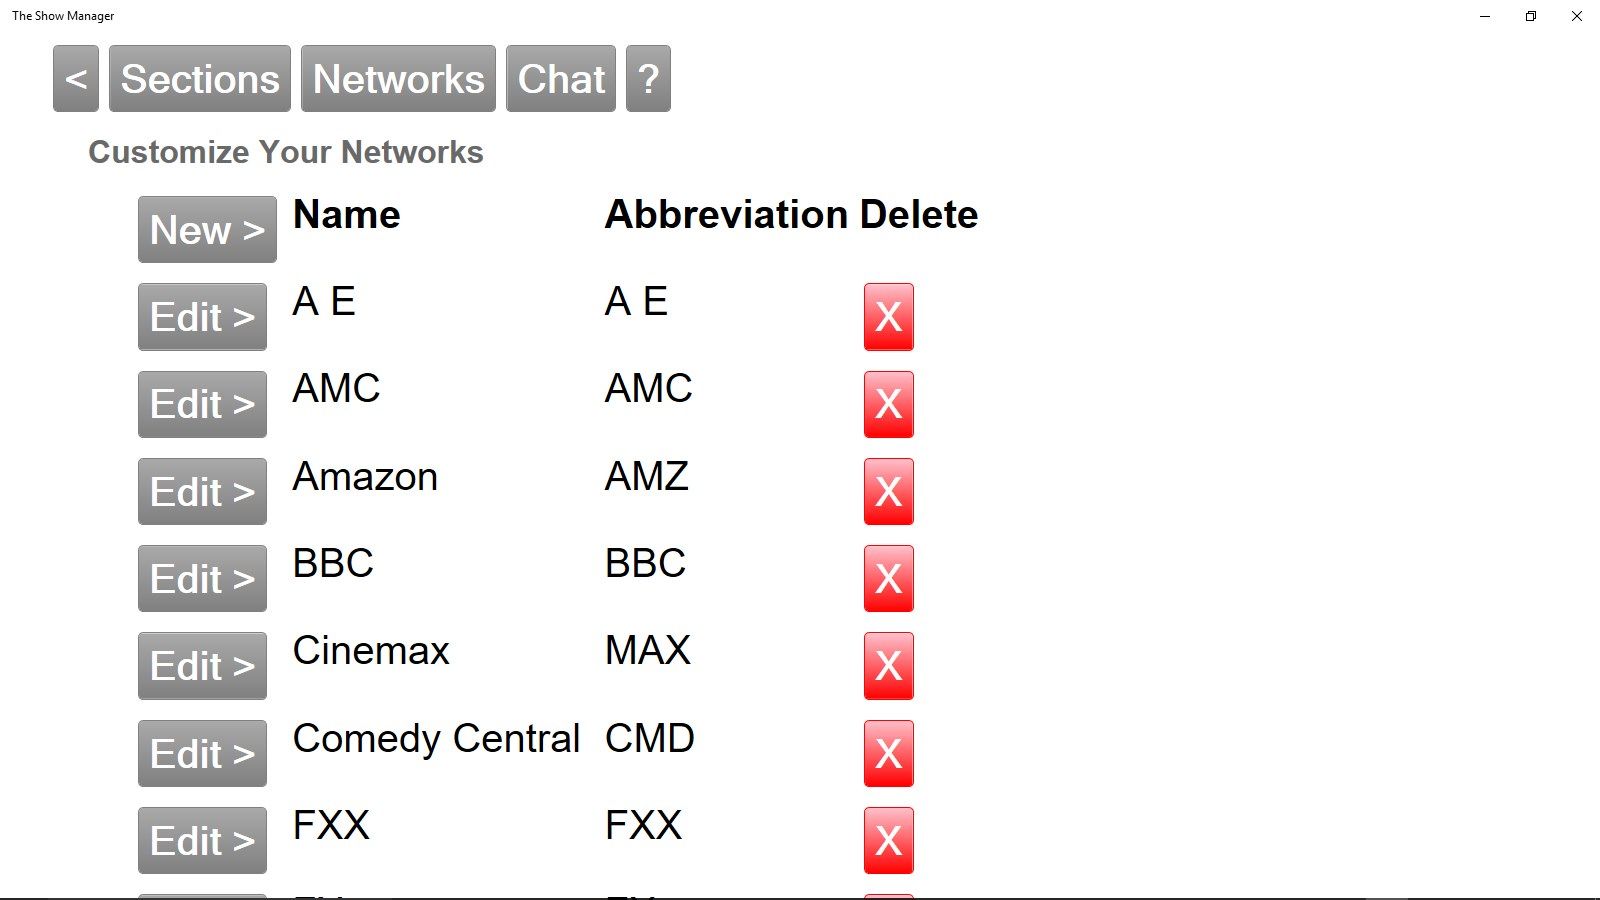 Customize your own list of networks.